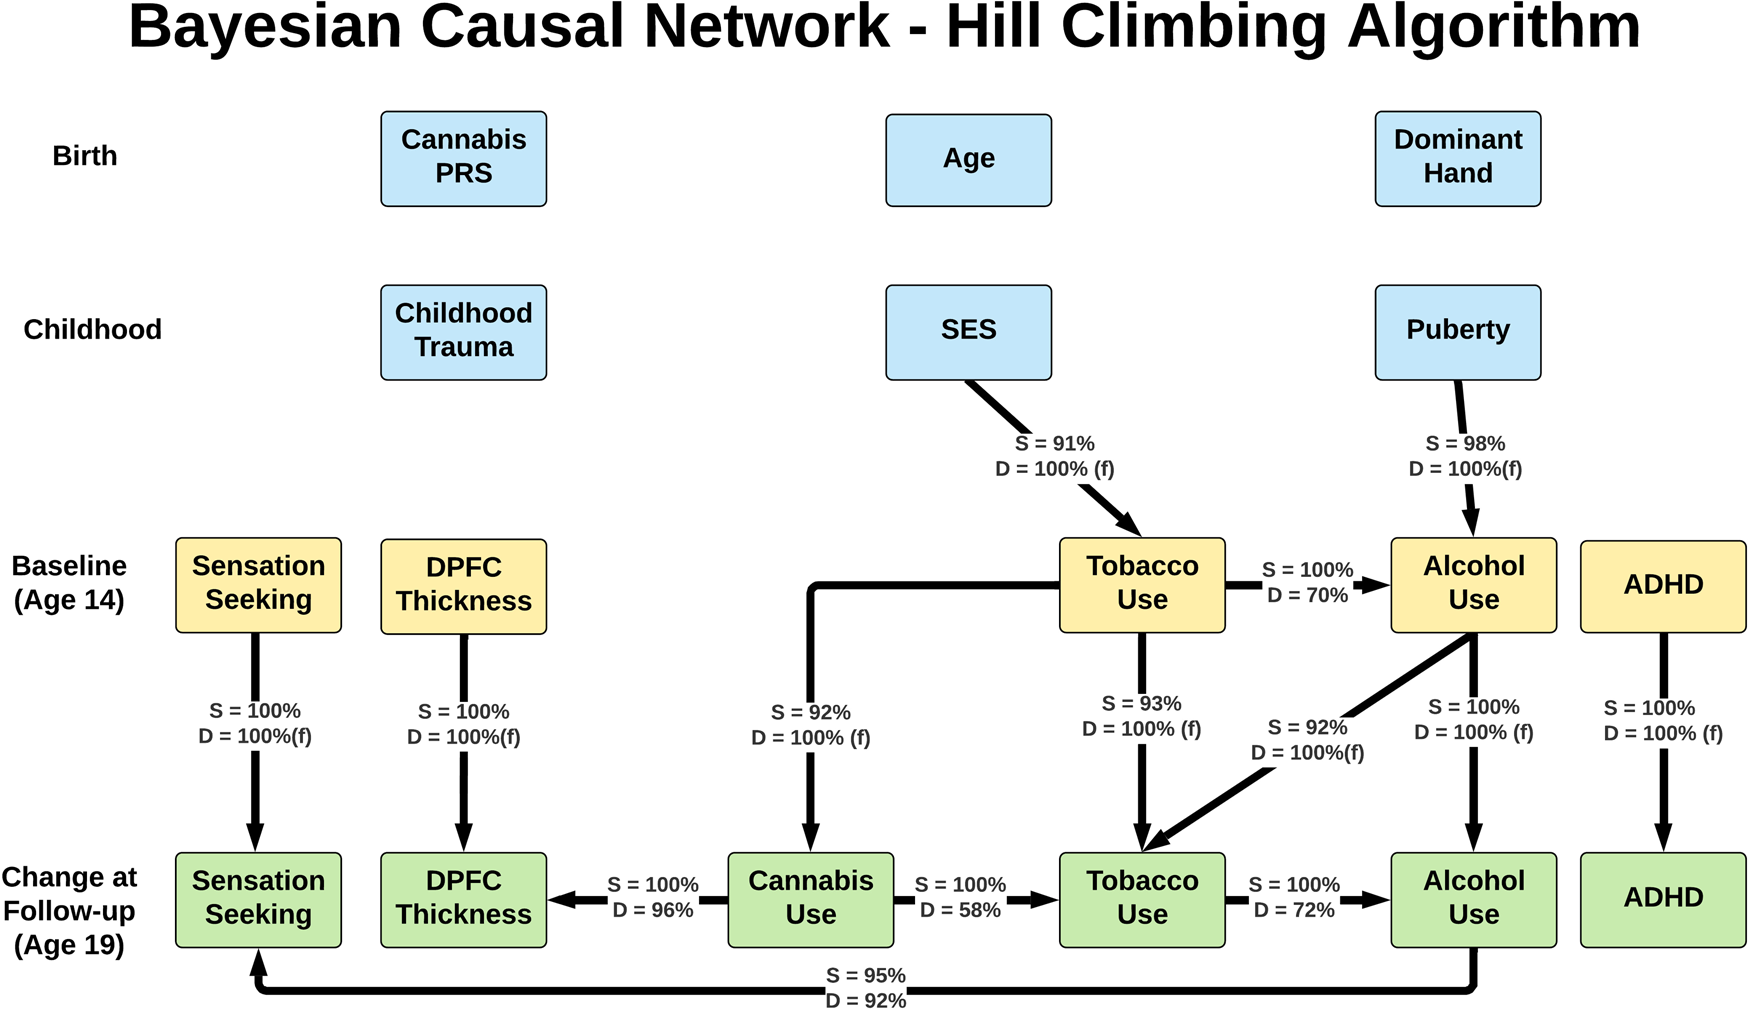 Bayesian causal network modeling suggests adolescent cannabis use